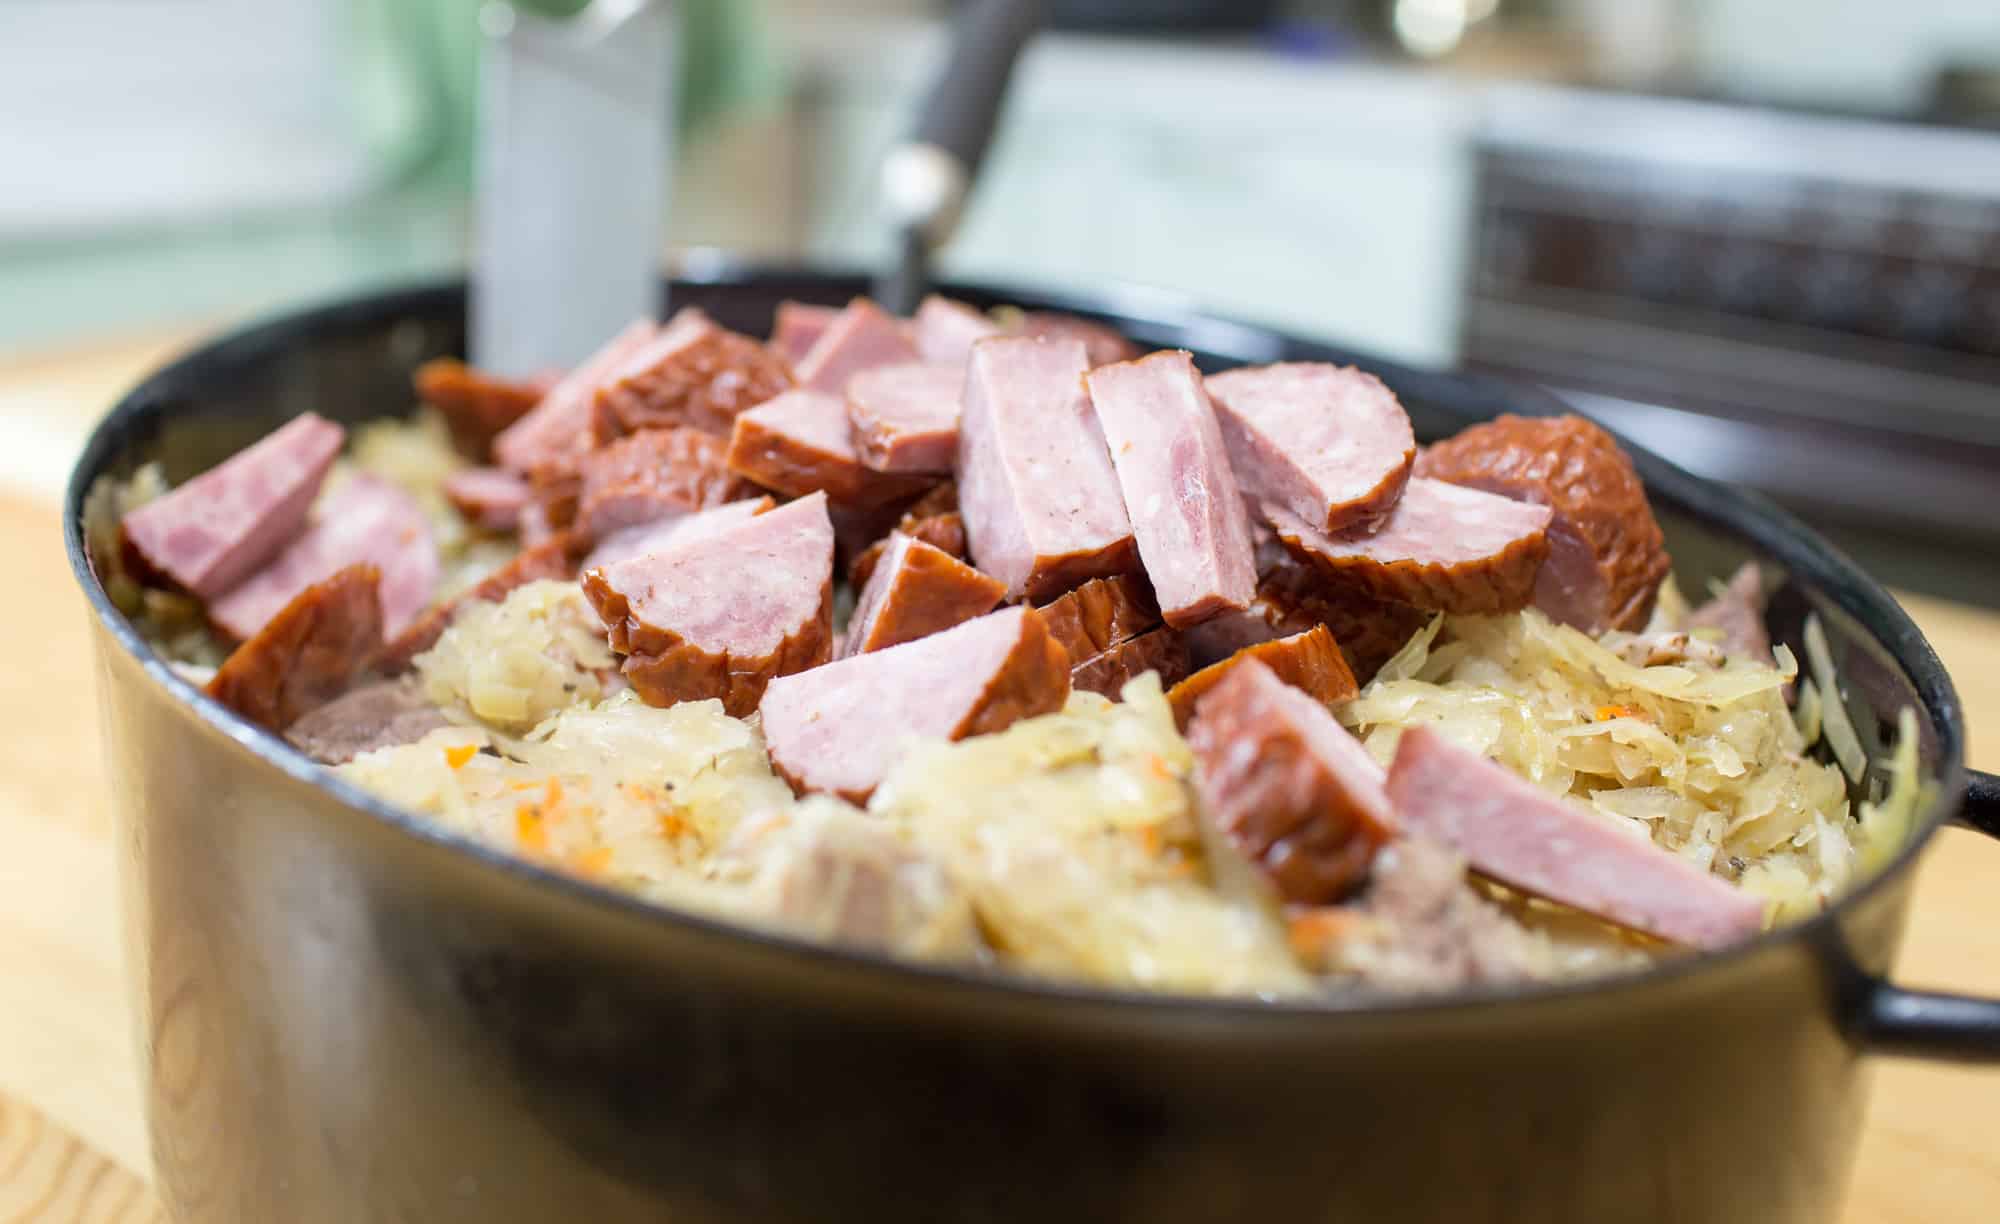 Closeup of slow cooker with sauerkraut and slices of sausage on top.